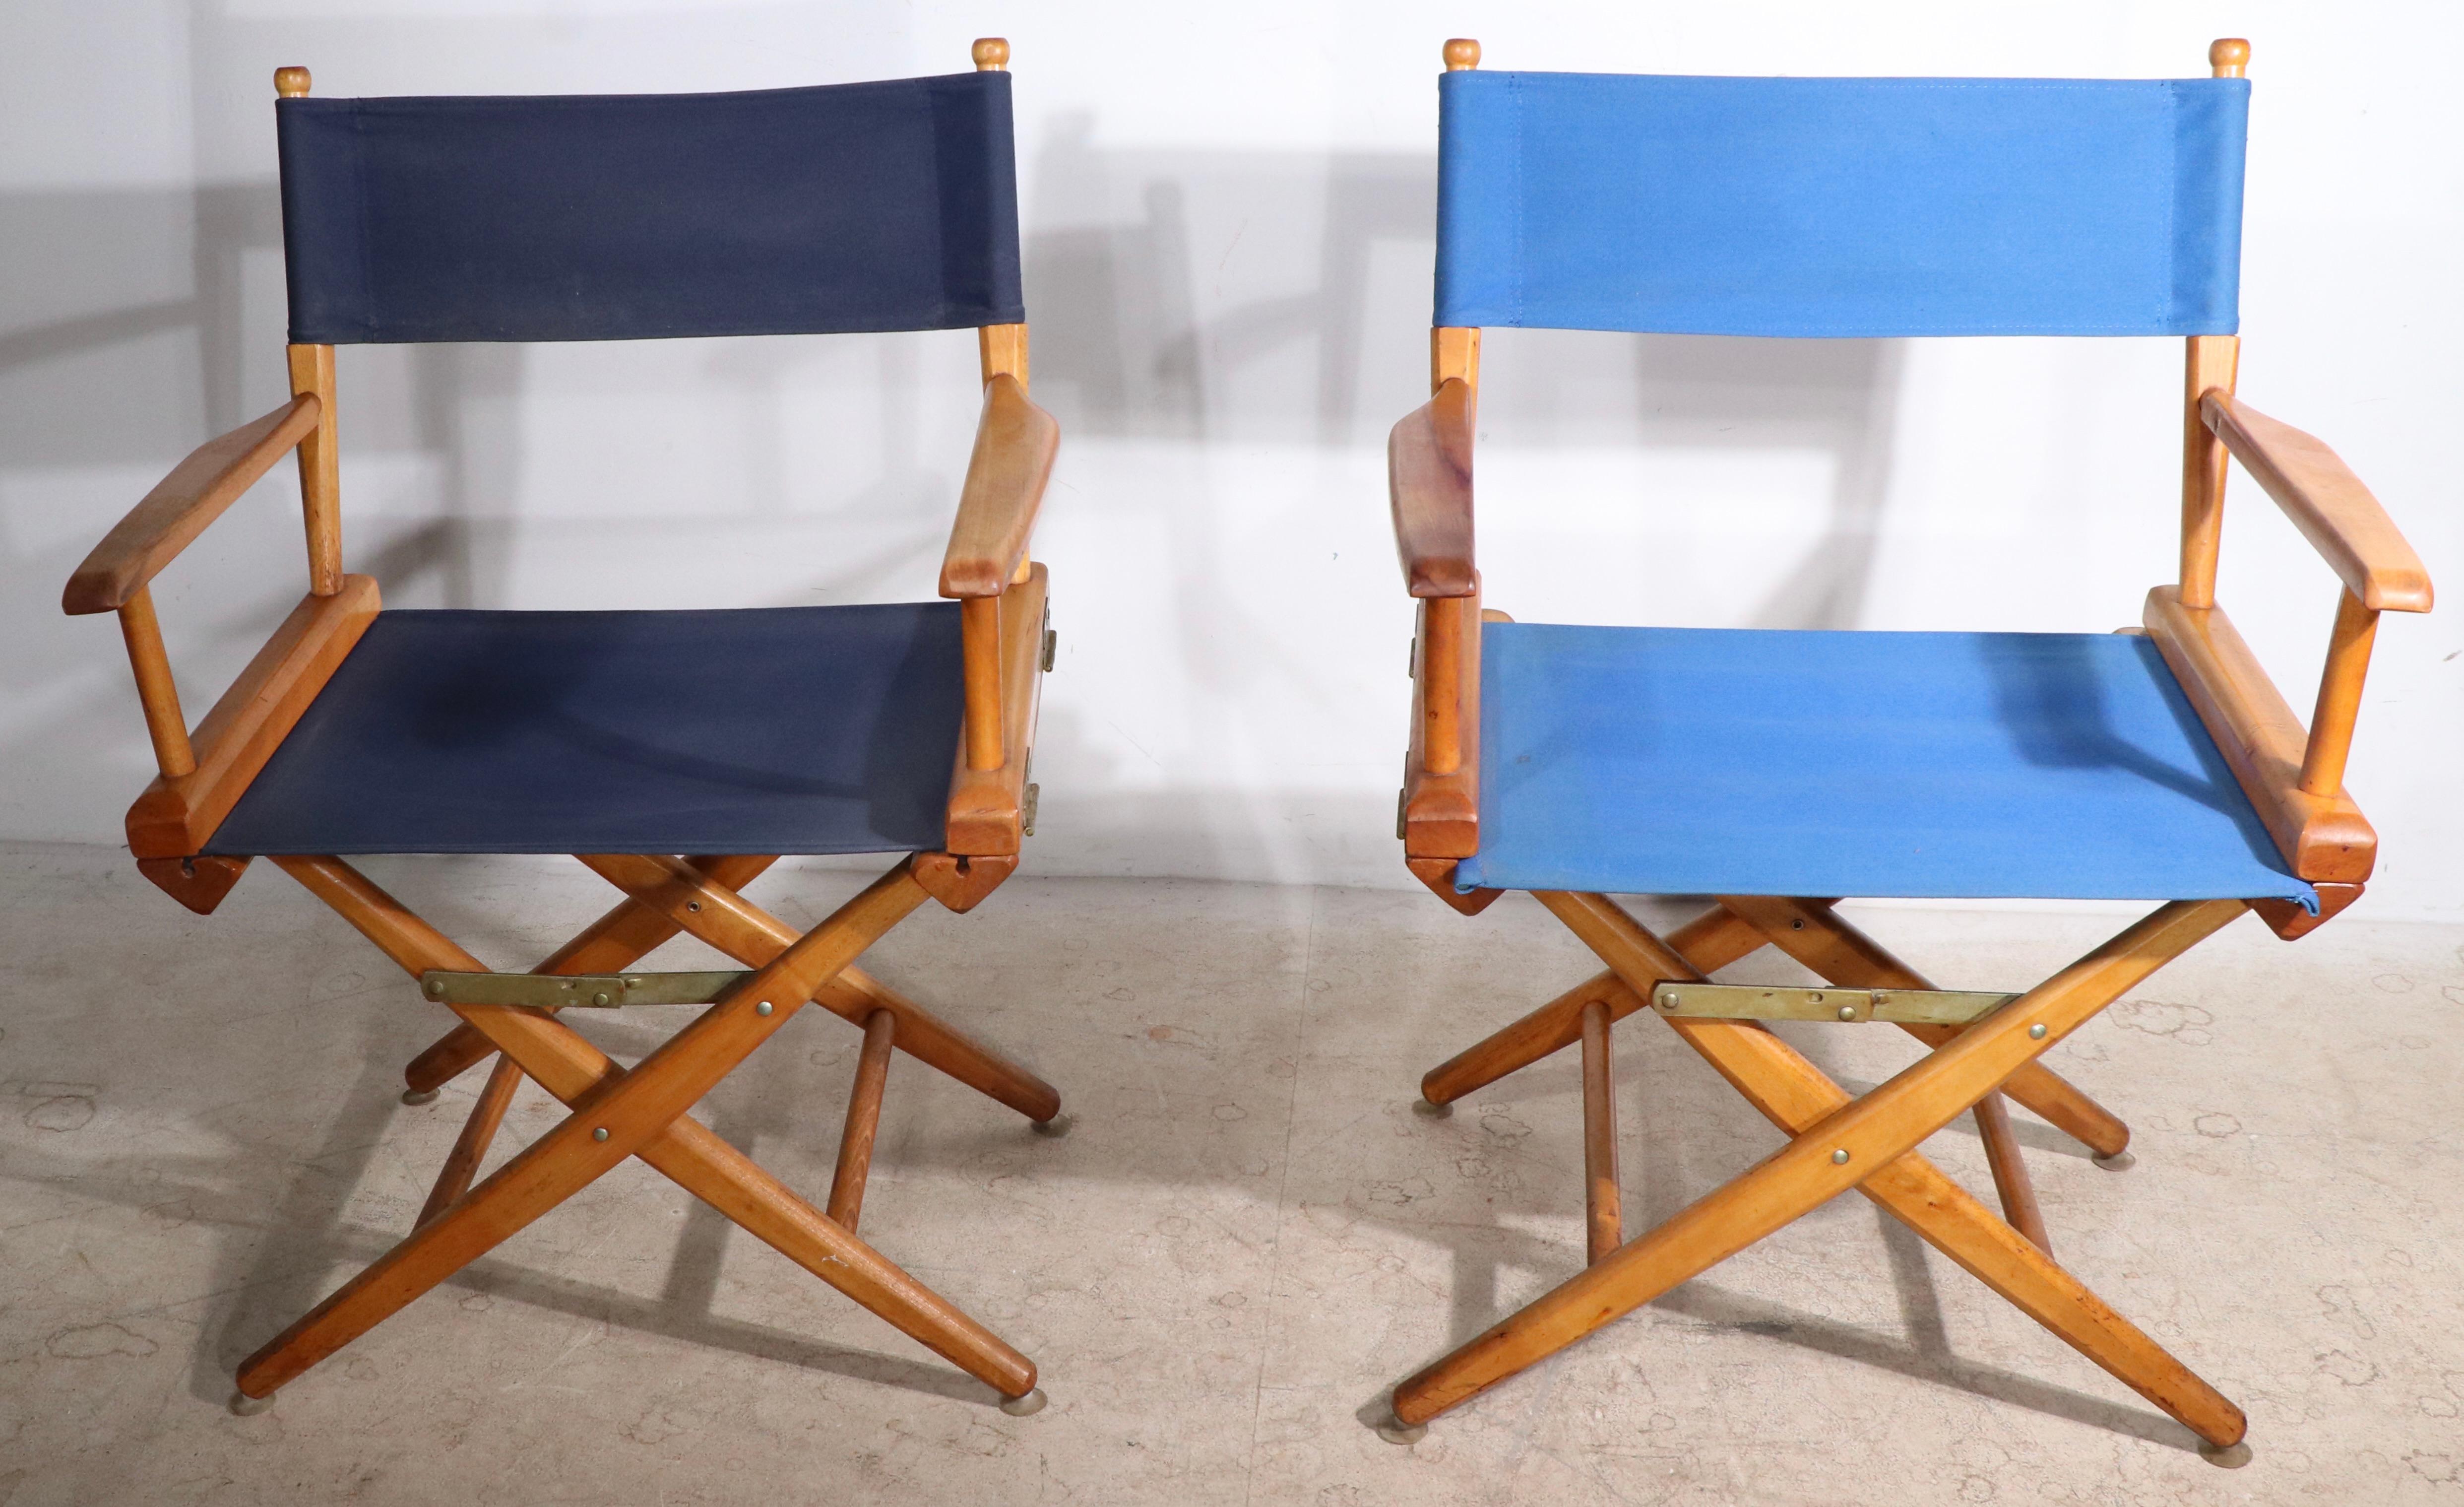 2 canvas and wood folding director chairs, each with canvas sling seat and back rests. Both chairs are in very good, original condition, clean and ready to use. One chair is a lighter shade of blue, the other is very dark blue.Please note both